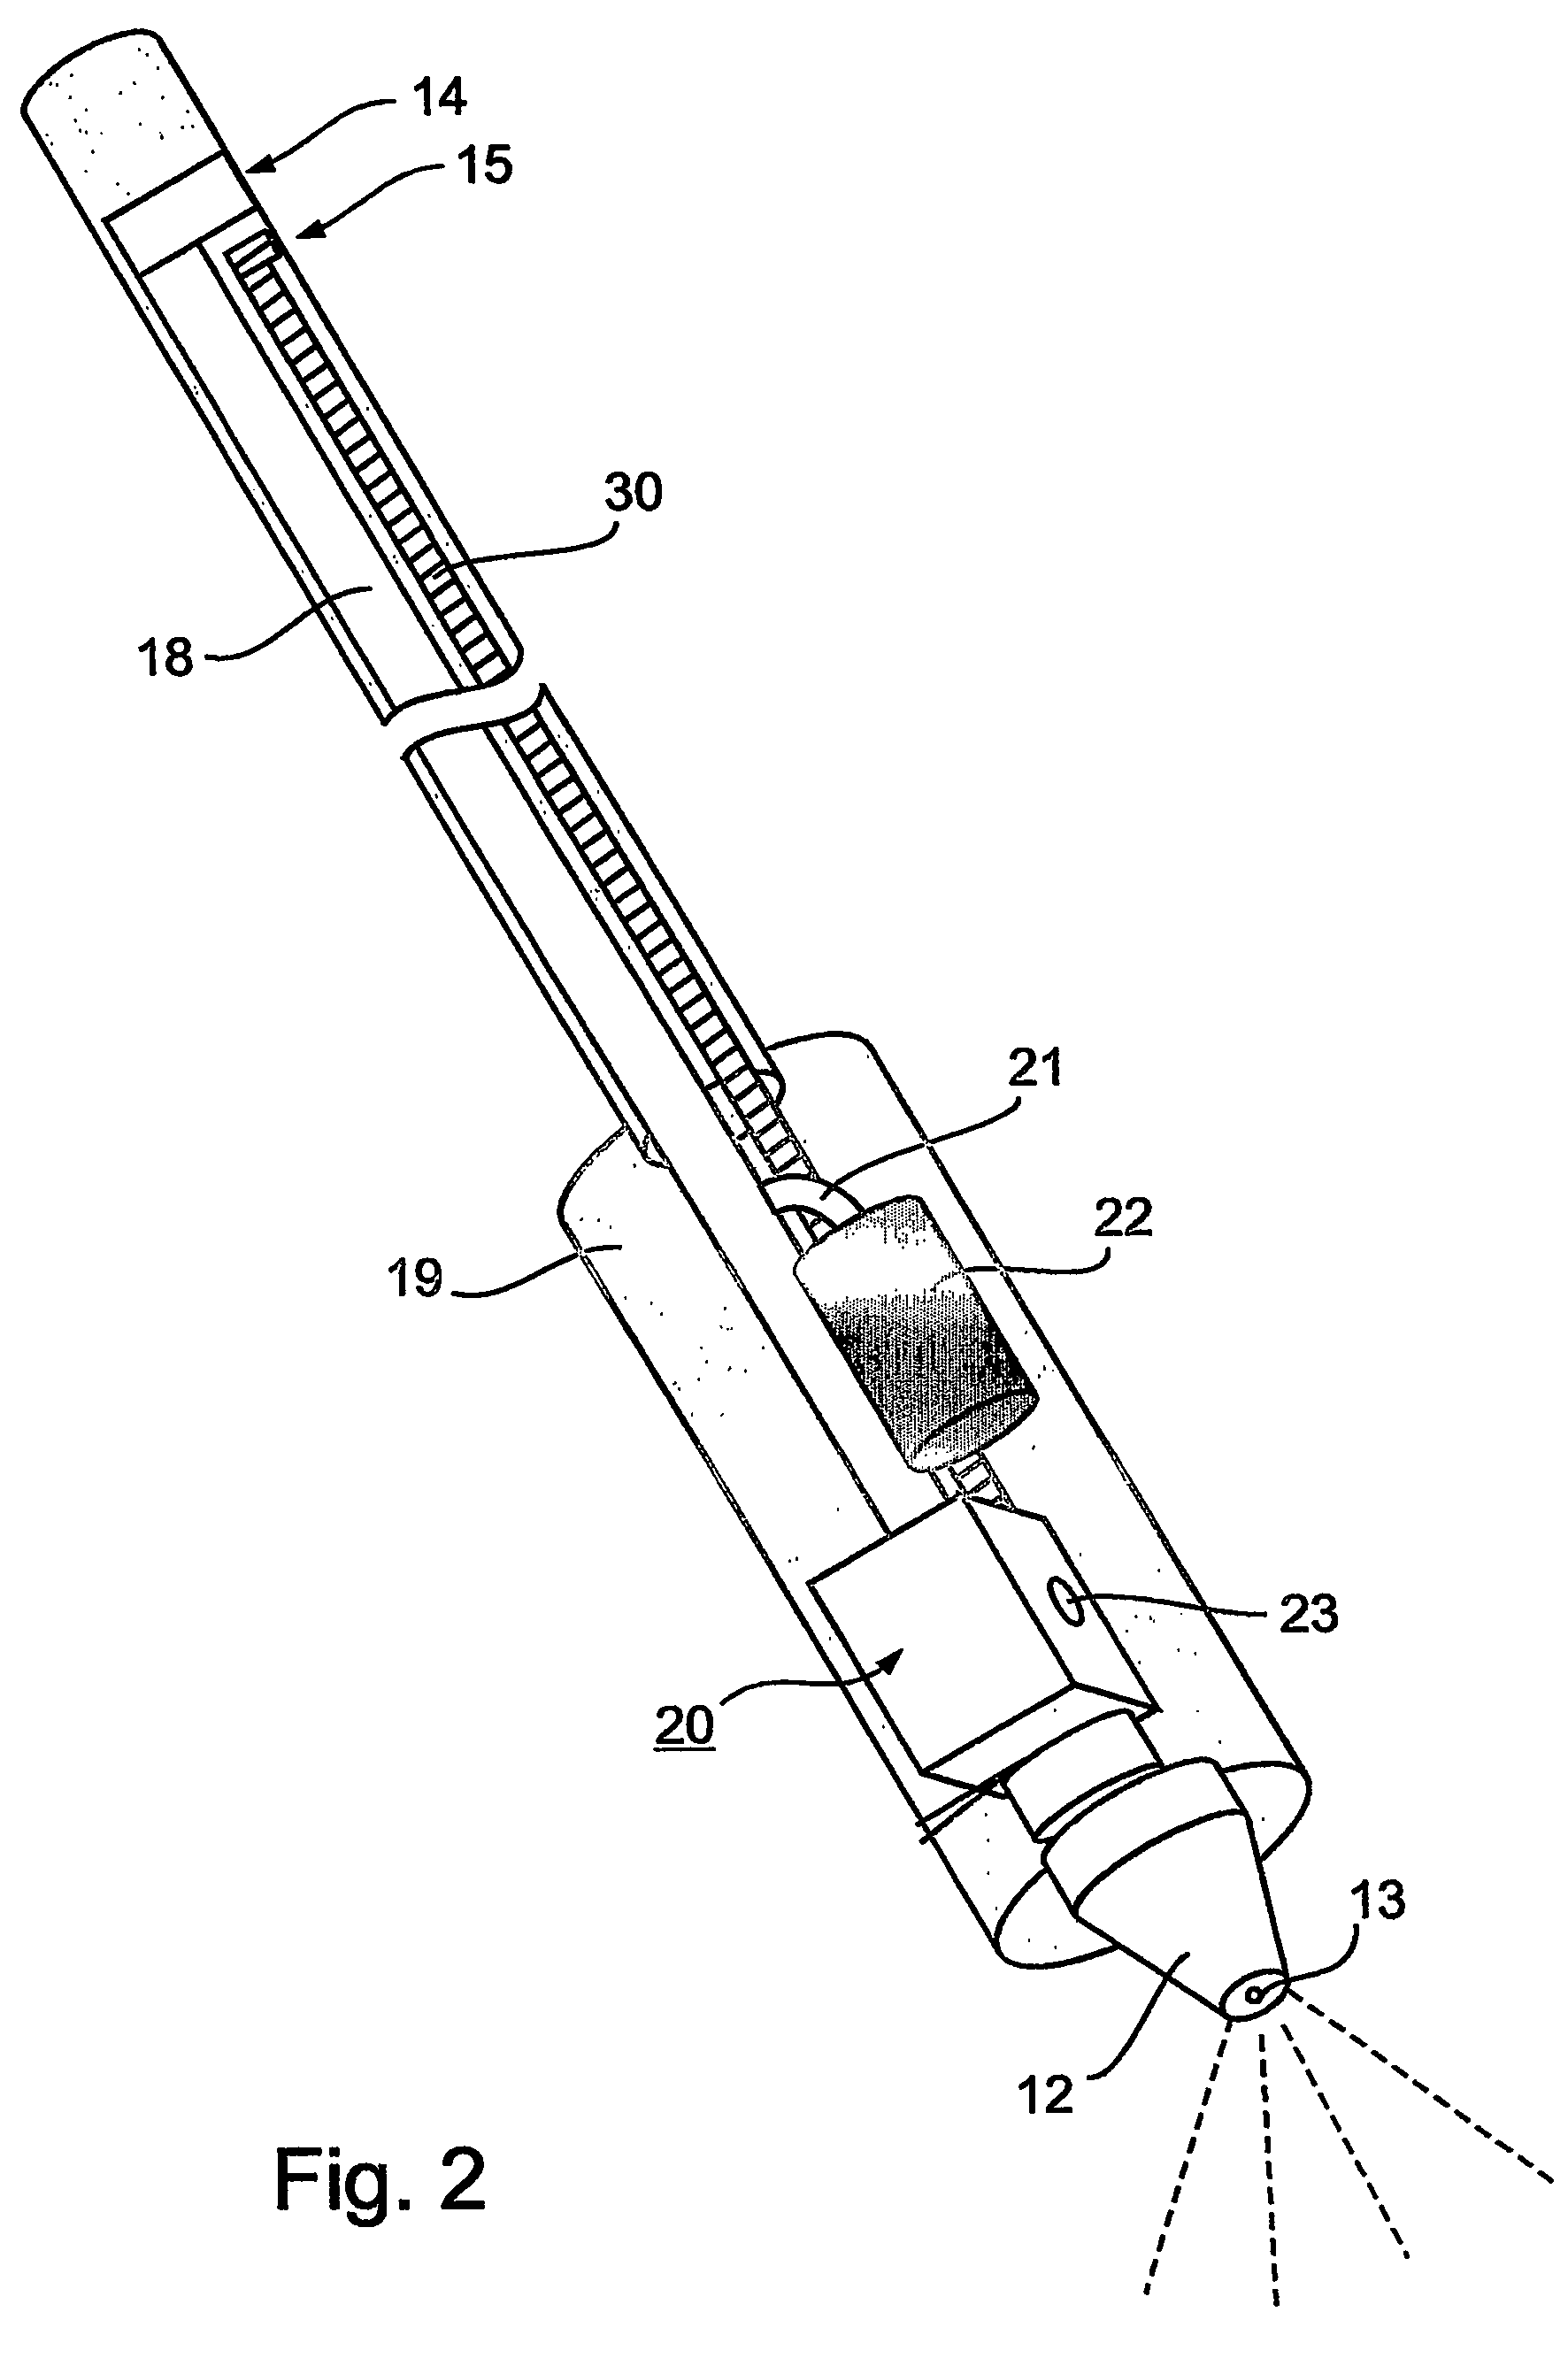 Liquid discharge apparatus particularly useful as a portable inoculation gun for anti-virus inoculation of plants